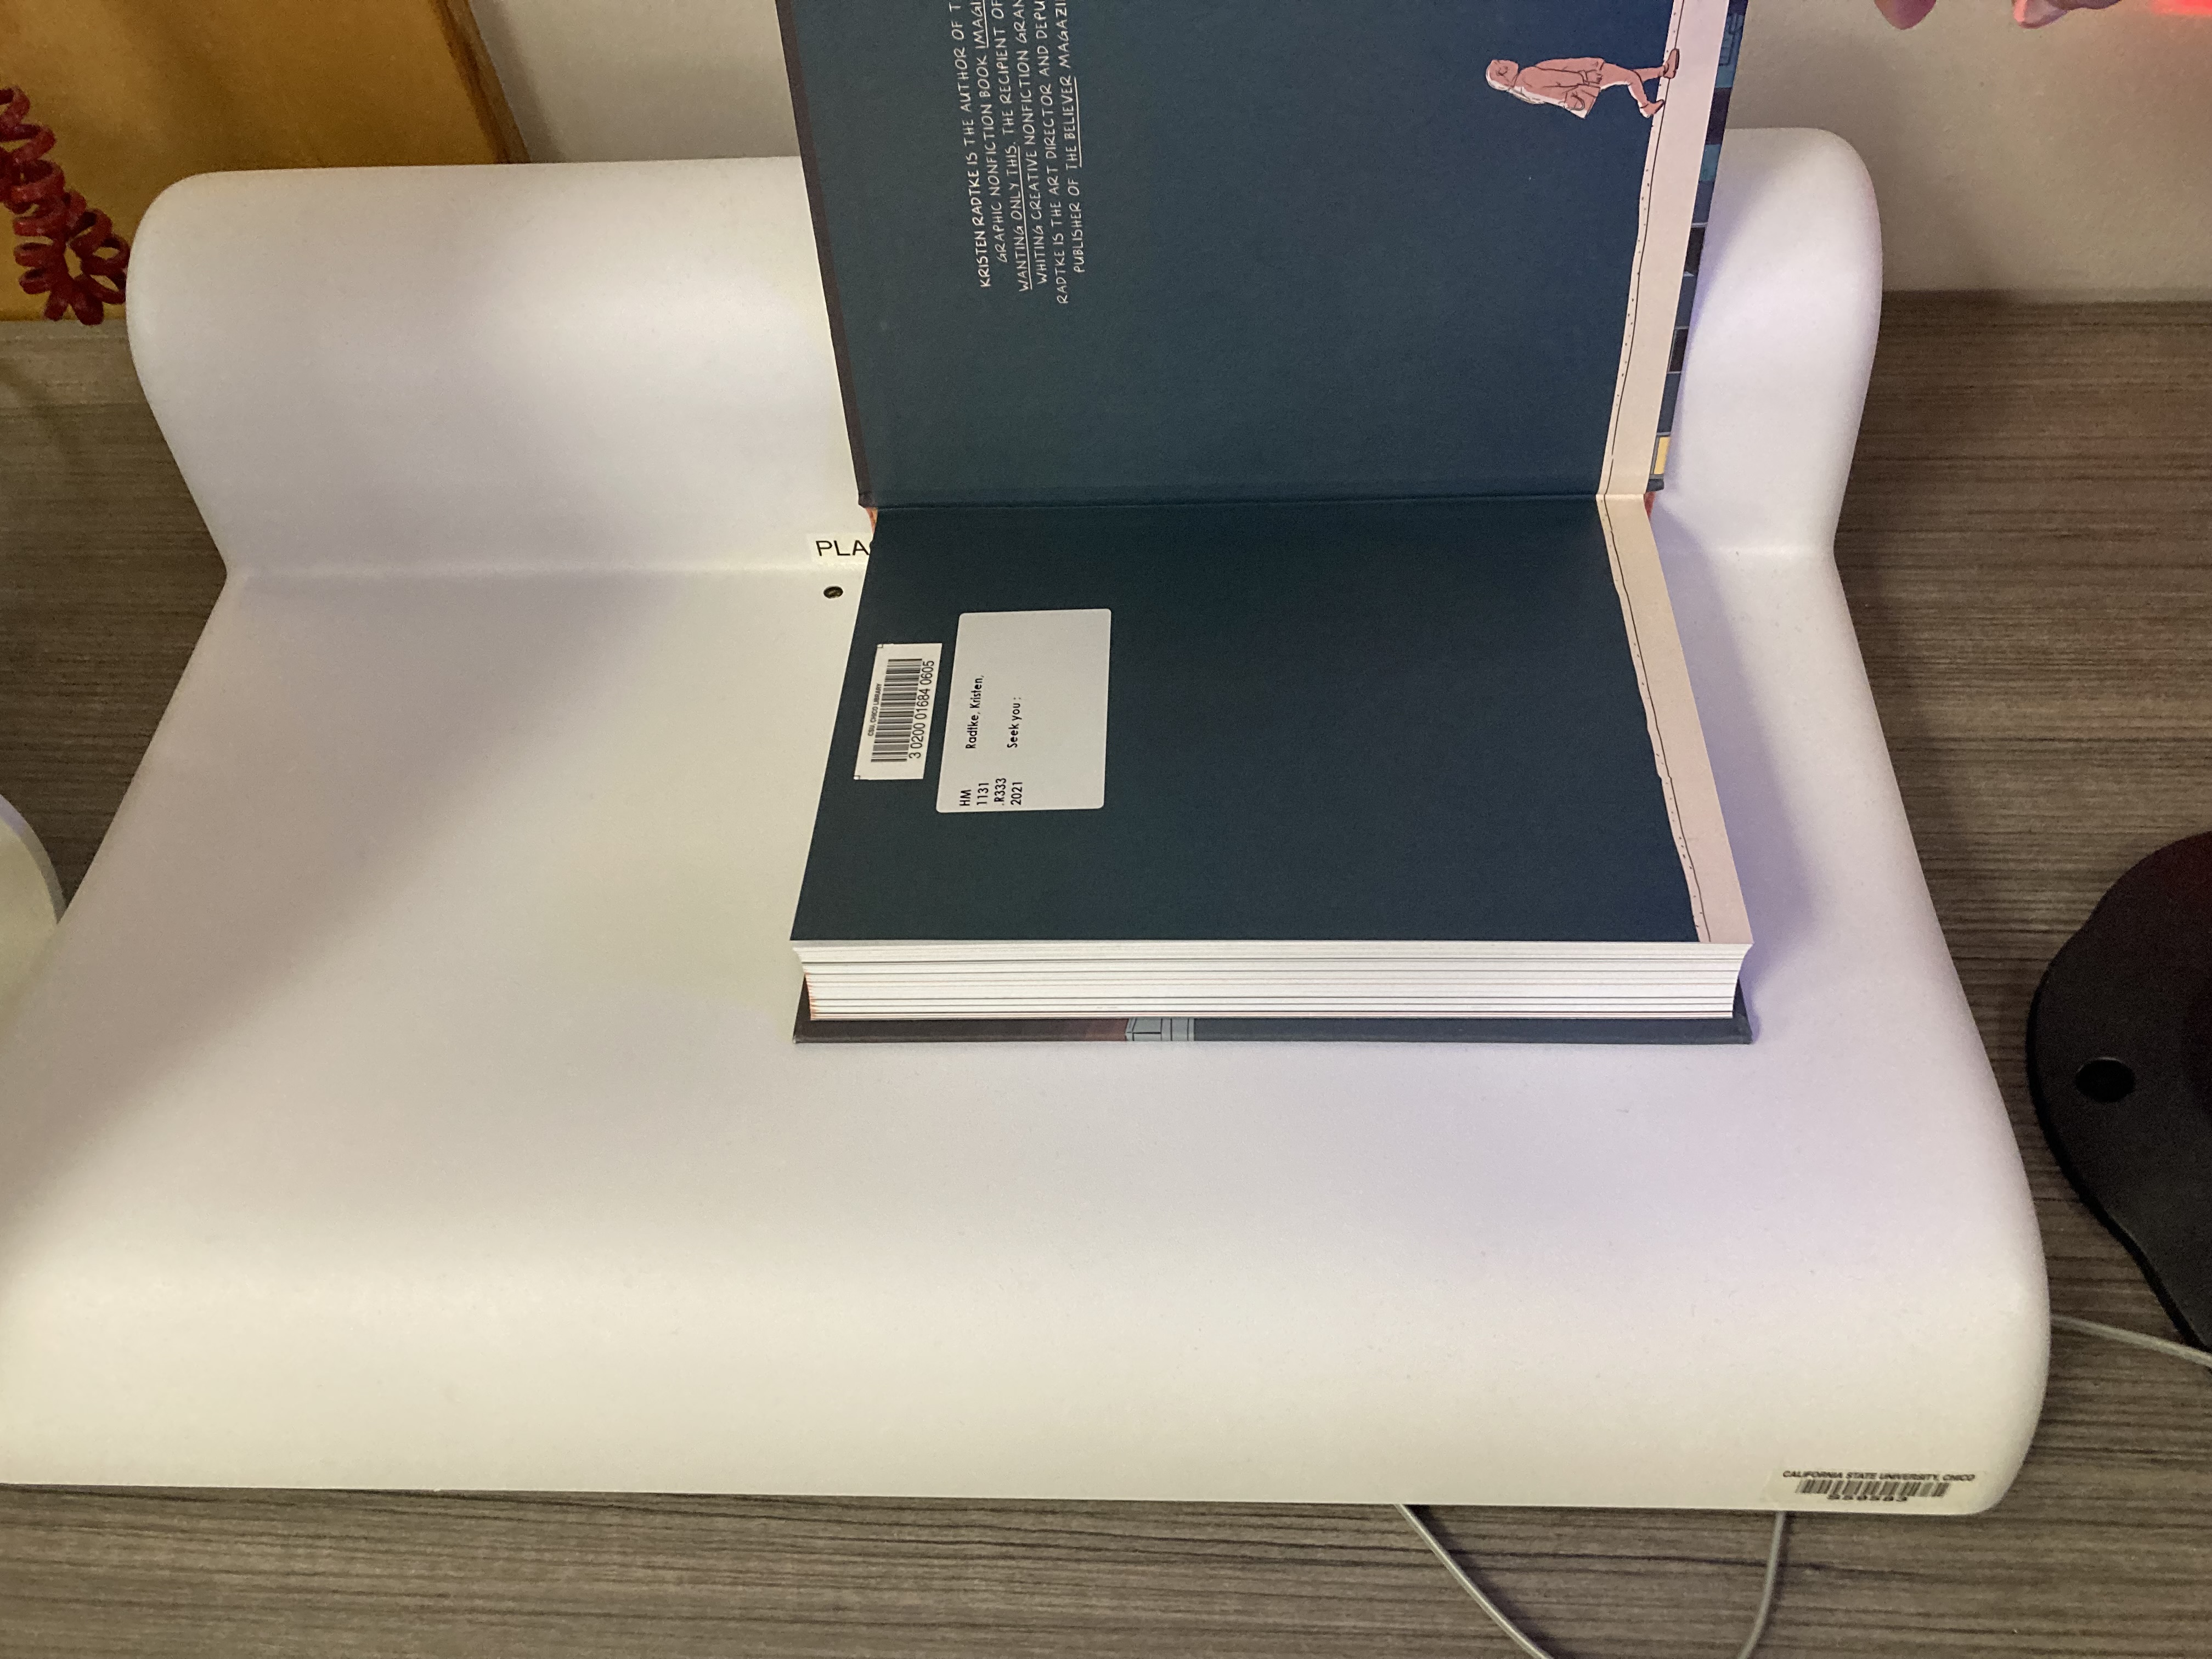 self-checkout book scanner